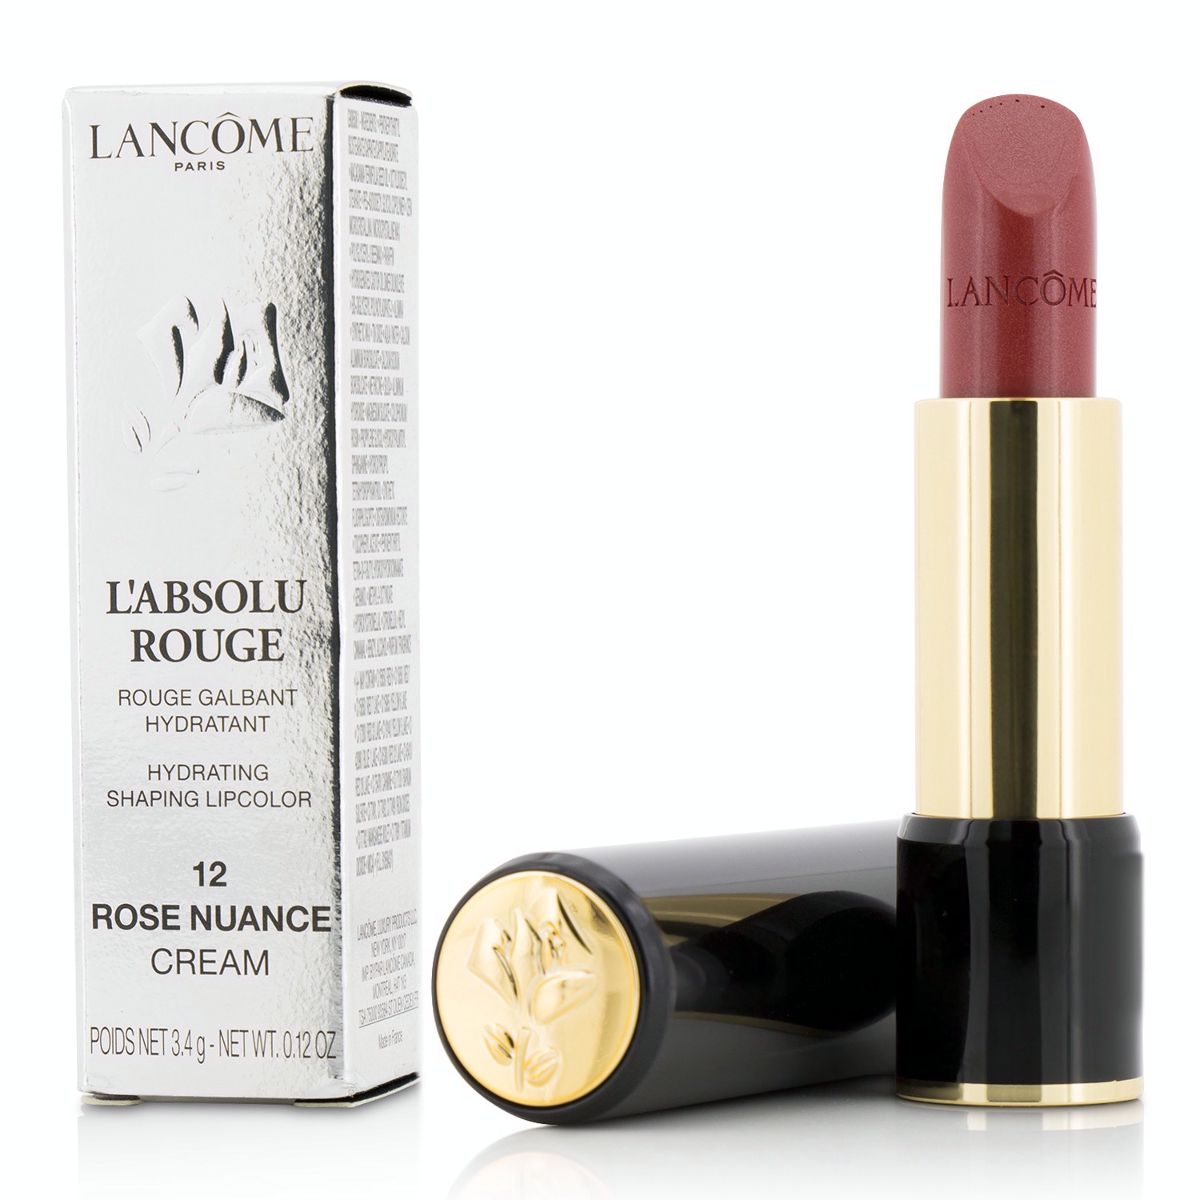 L Absolu Rouge Hydrating Shaping Lipcolor - # 12 Rose Nuance (Cream) Lancome Image